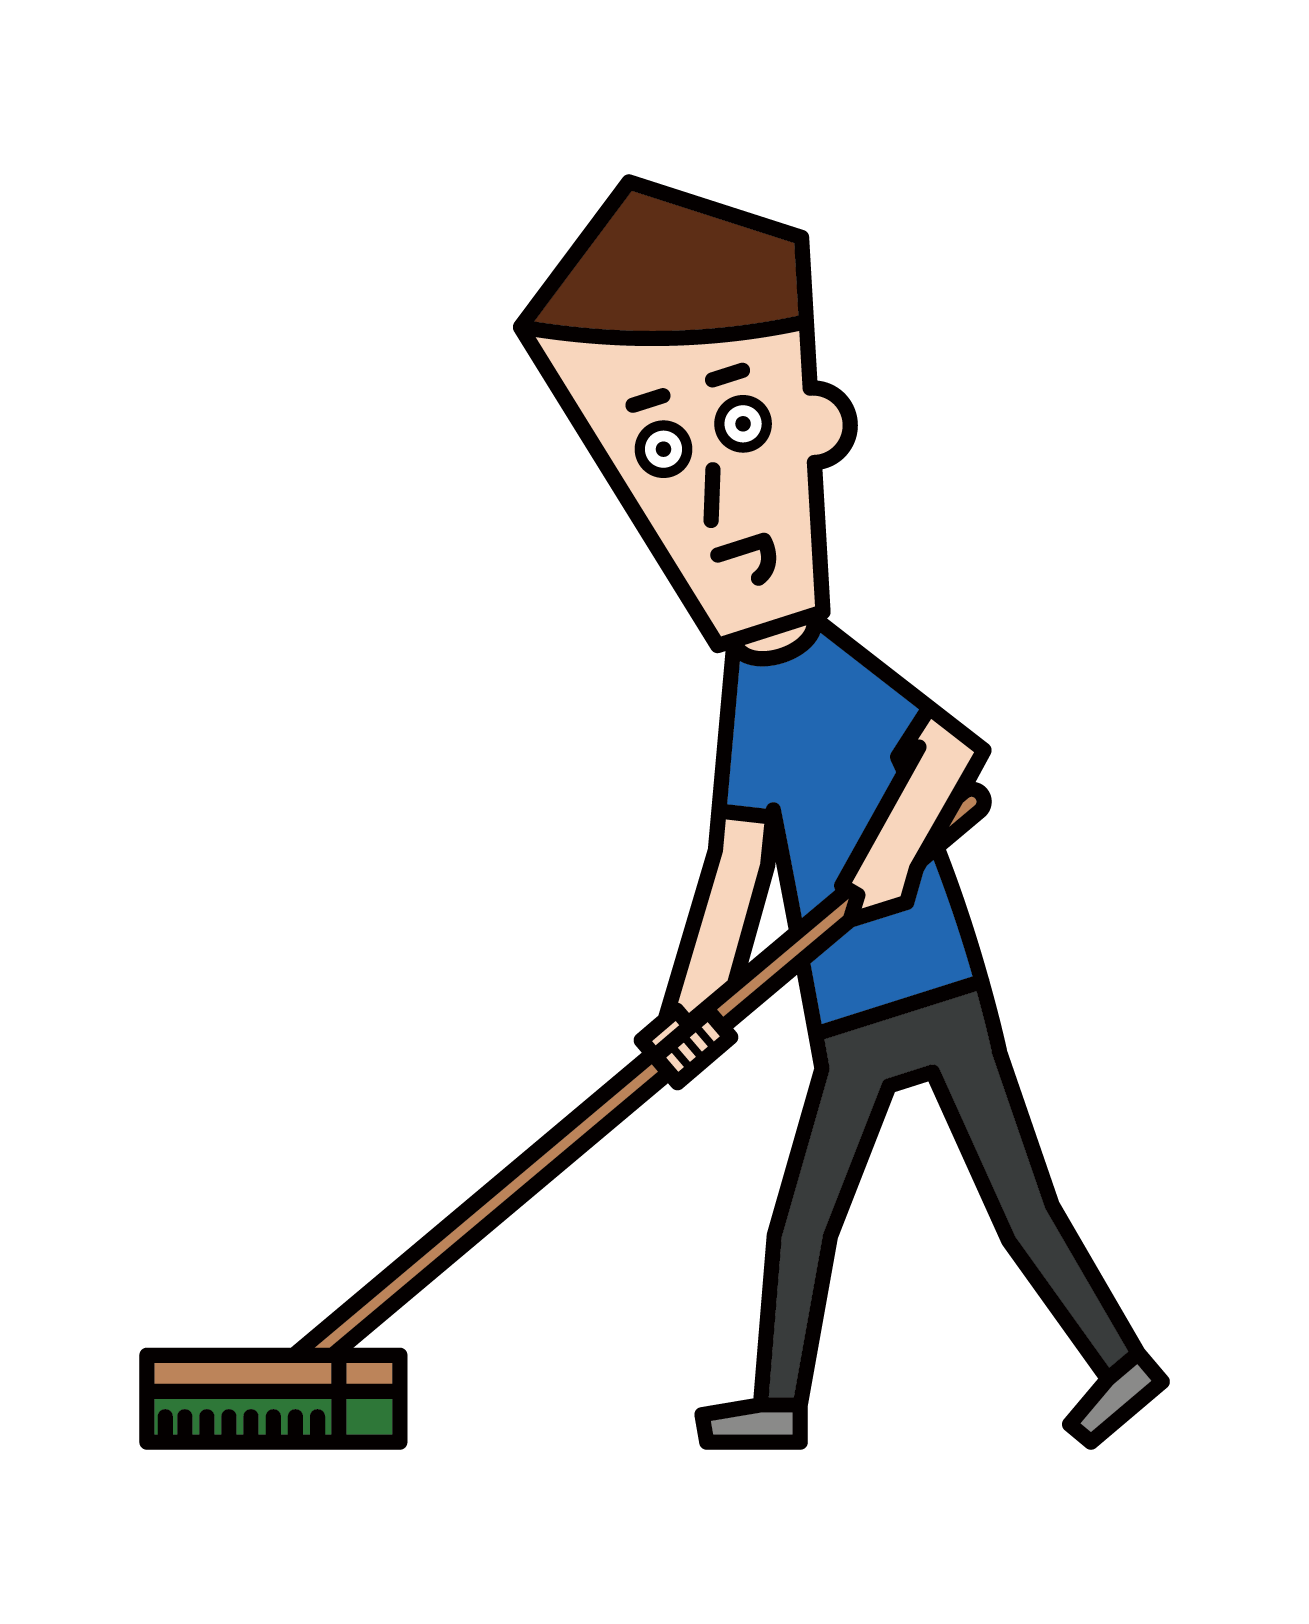 Illustration of a man cleaning with a brush